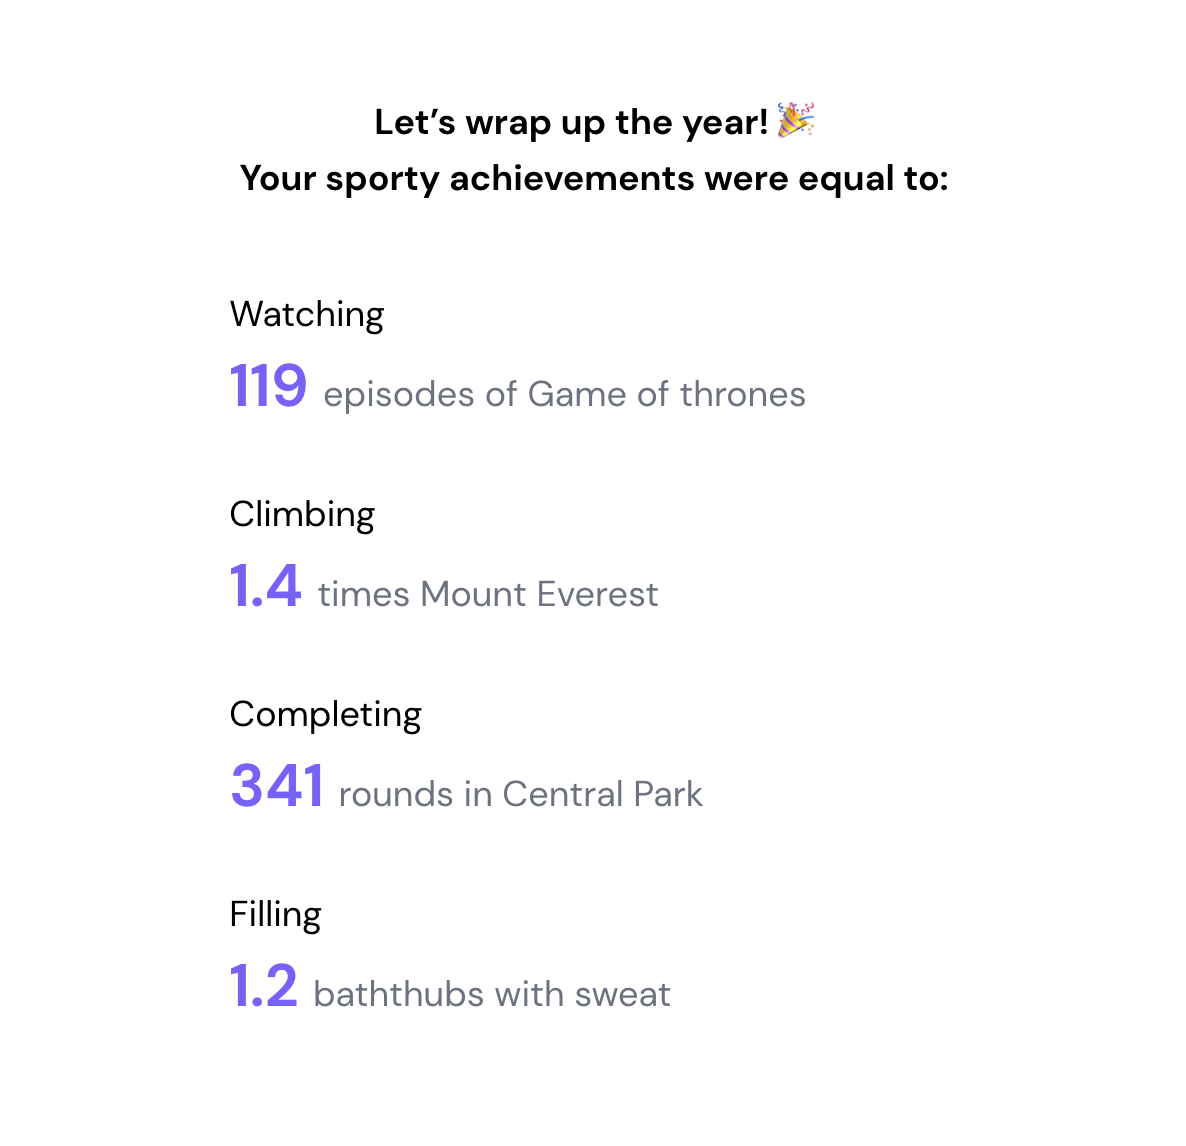 Fun statistics to compare your activities with